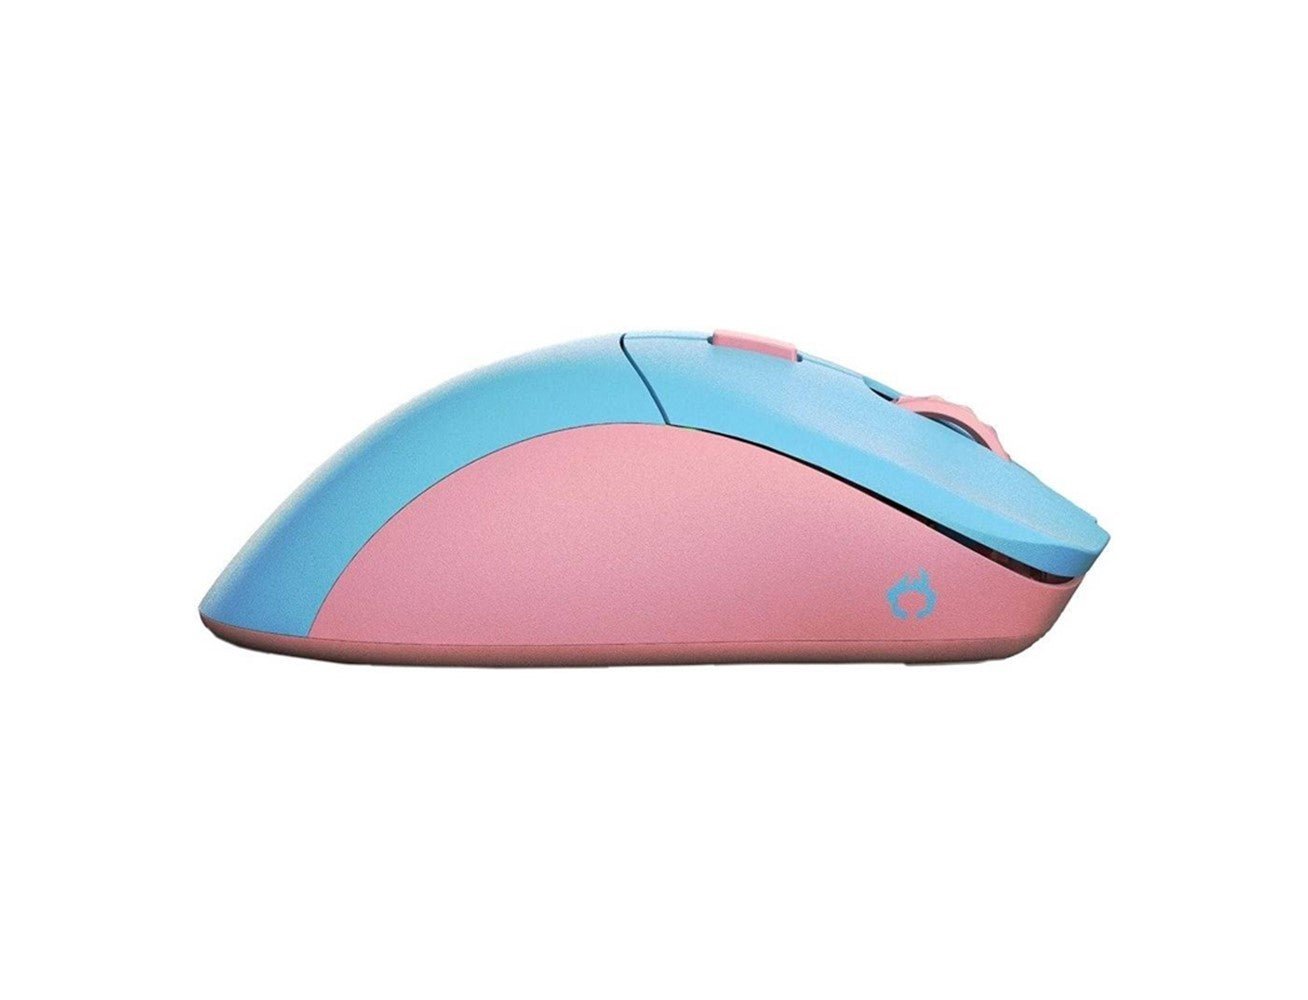 Glorious Model D Wireless PRO Mouse - Skyline Blue/Pink - Forge